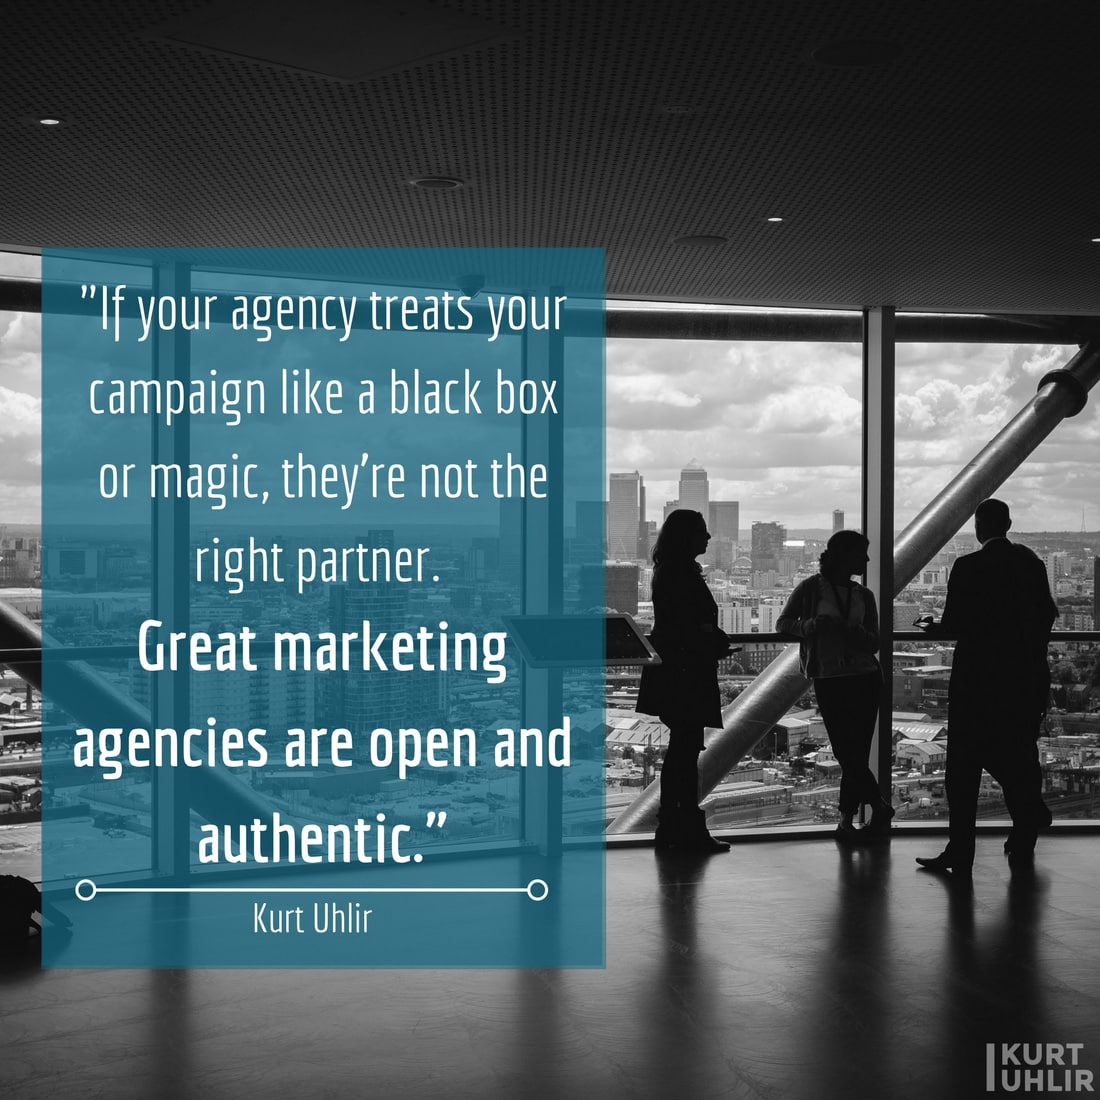 If your agency treats your campaign like a black box or magic, they're not the right partner. Great marketing agencies are open and authentic. - Kurt Uhlir quote on marketing agencies